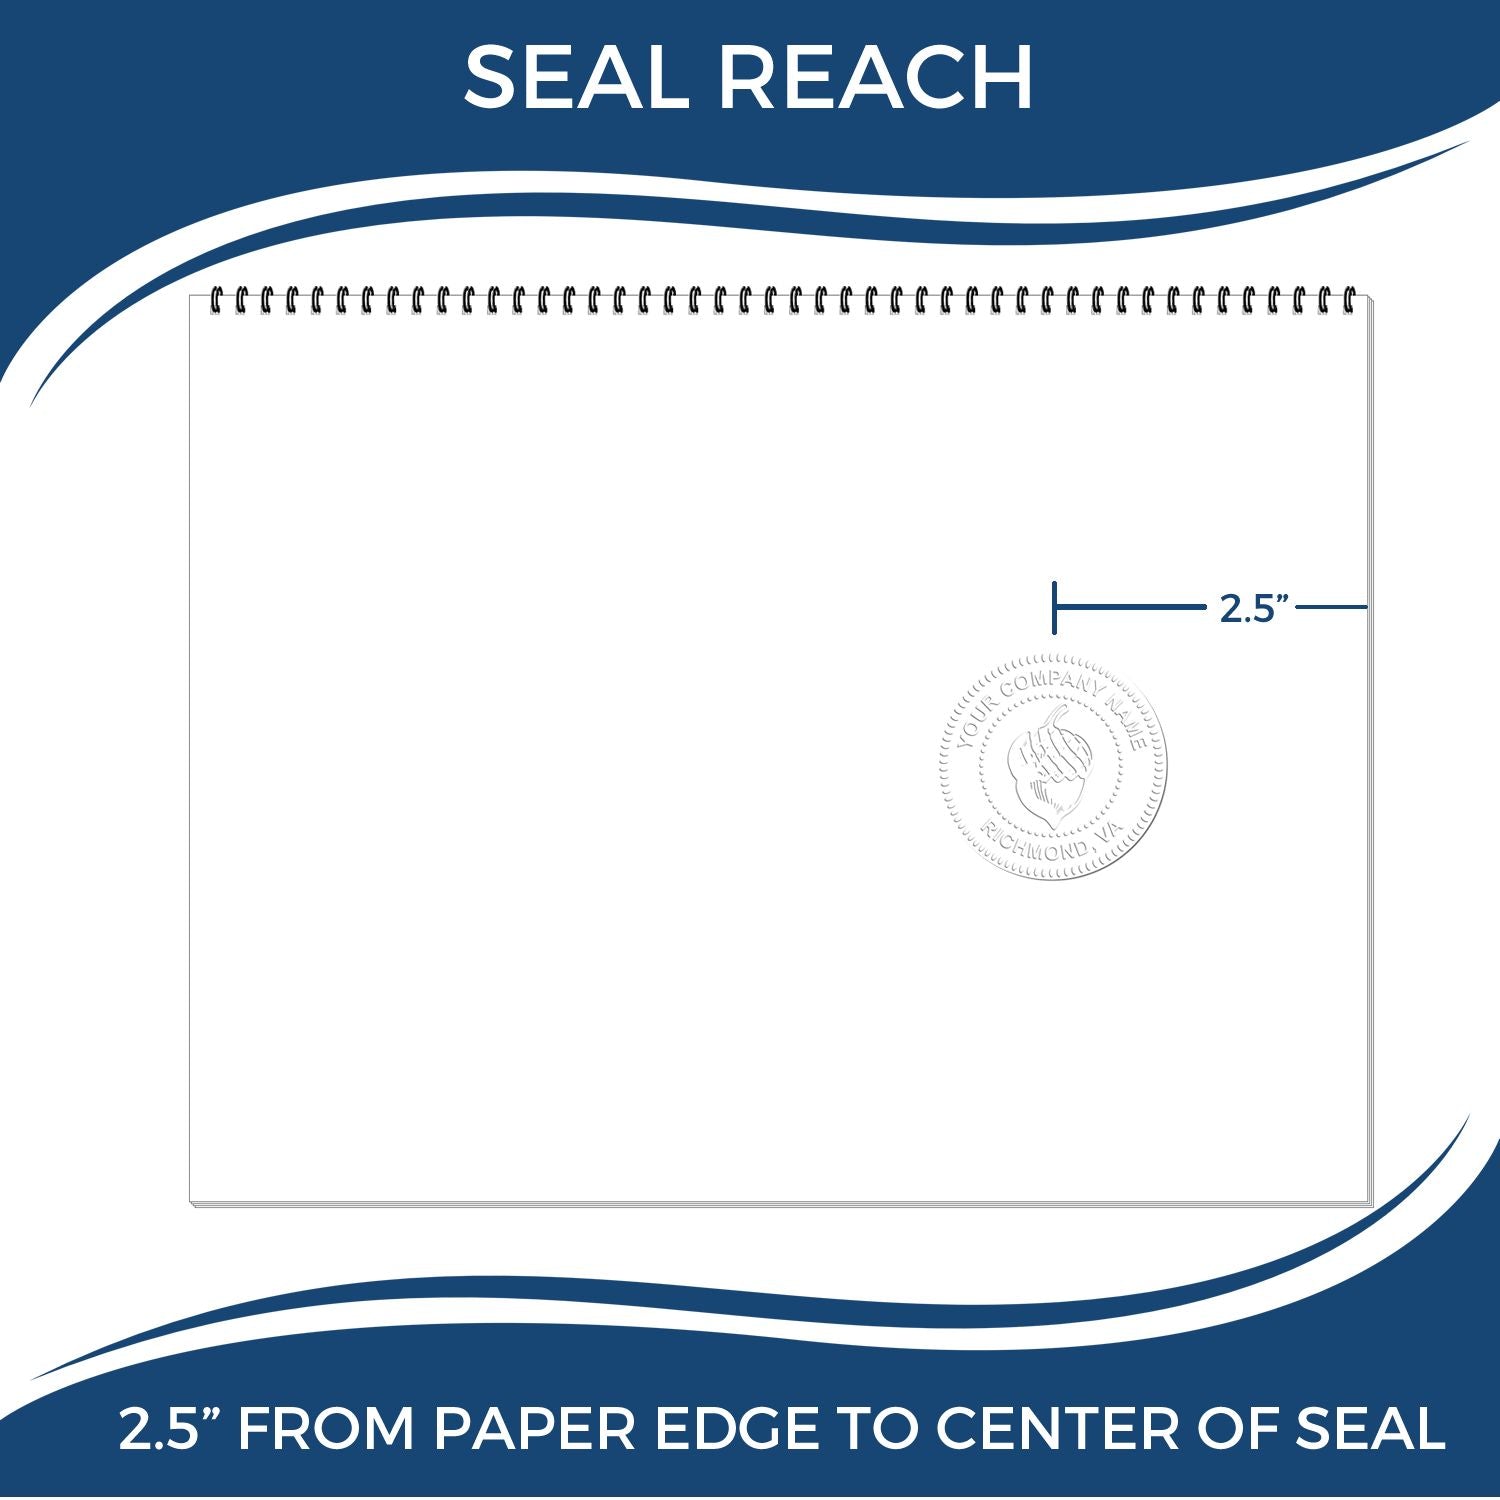 An infographic showing the seal reach which is represented by a ruler and a miniature seal image of the Heavy Duty Cast Iron Colorado Engineer Seal Embosser